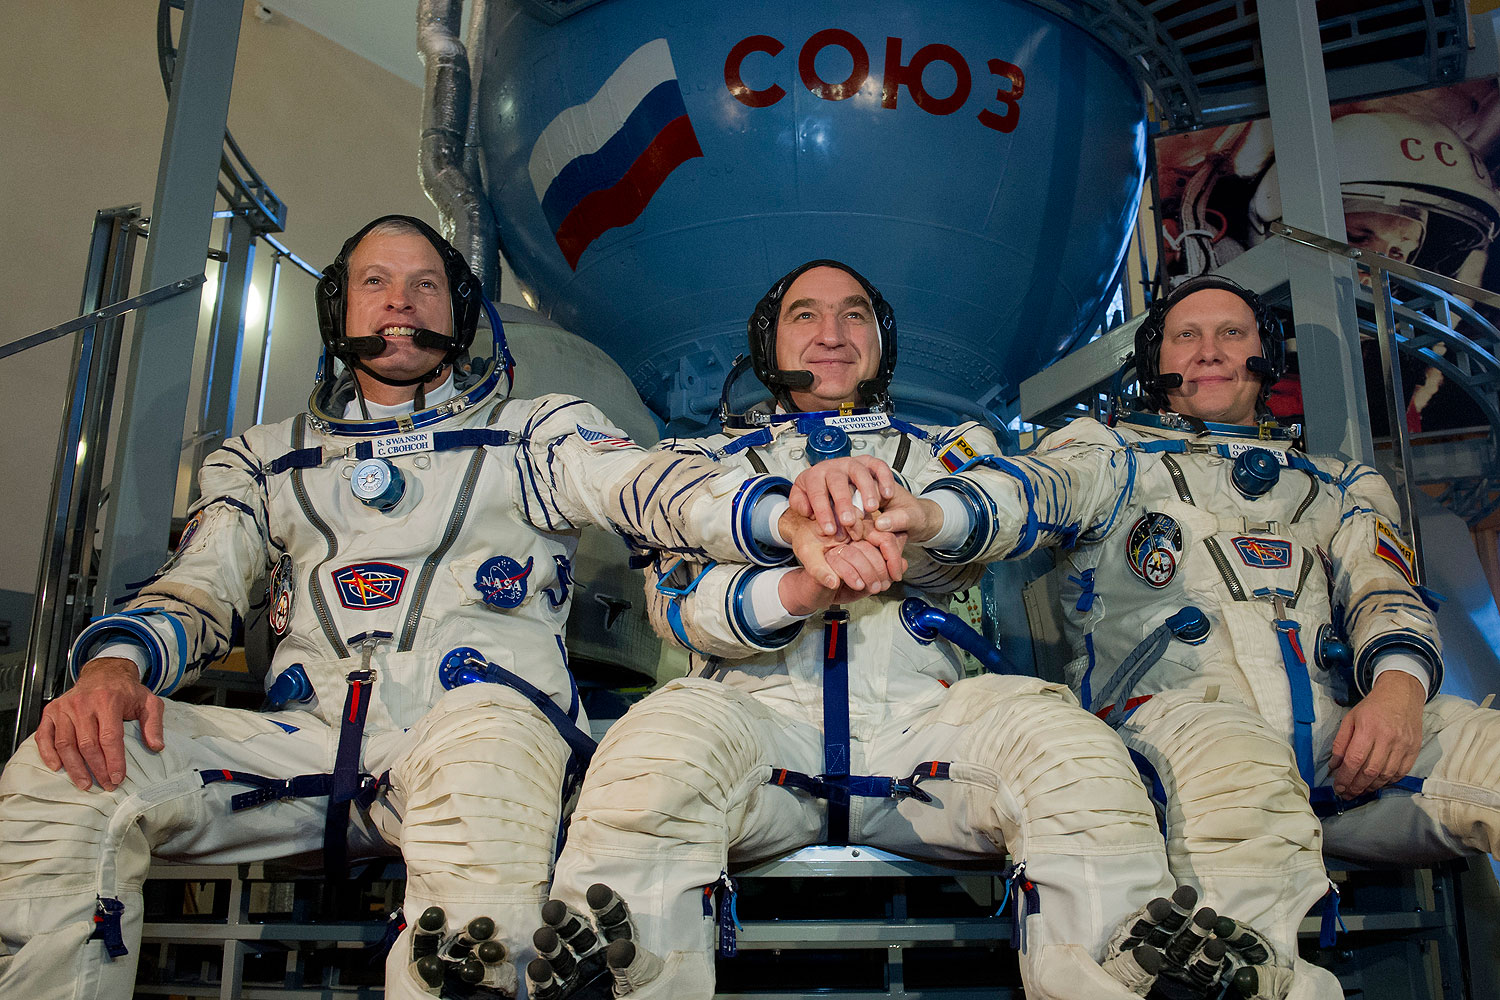 U.S. NASA astronaut Steven Swanson (L) joins hands with Russian cosmonauts, Alexander Skvortsov (C) and Oleg Artemyev (R), in front of a mock-up of a Soyuz TMA spacecraft at the Gagarin Cosmonauts' Training Centre in Star City centre outside Moscow, on March 5, 2014 (AFP / Getty Images)